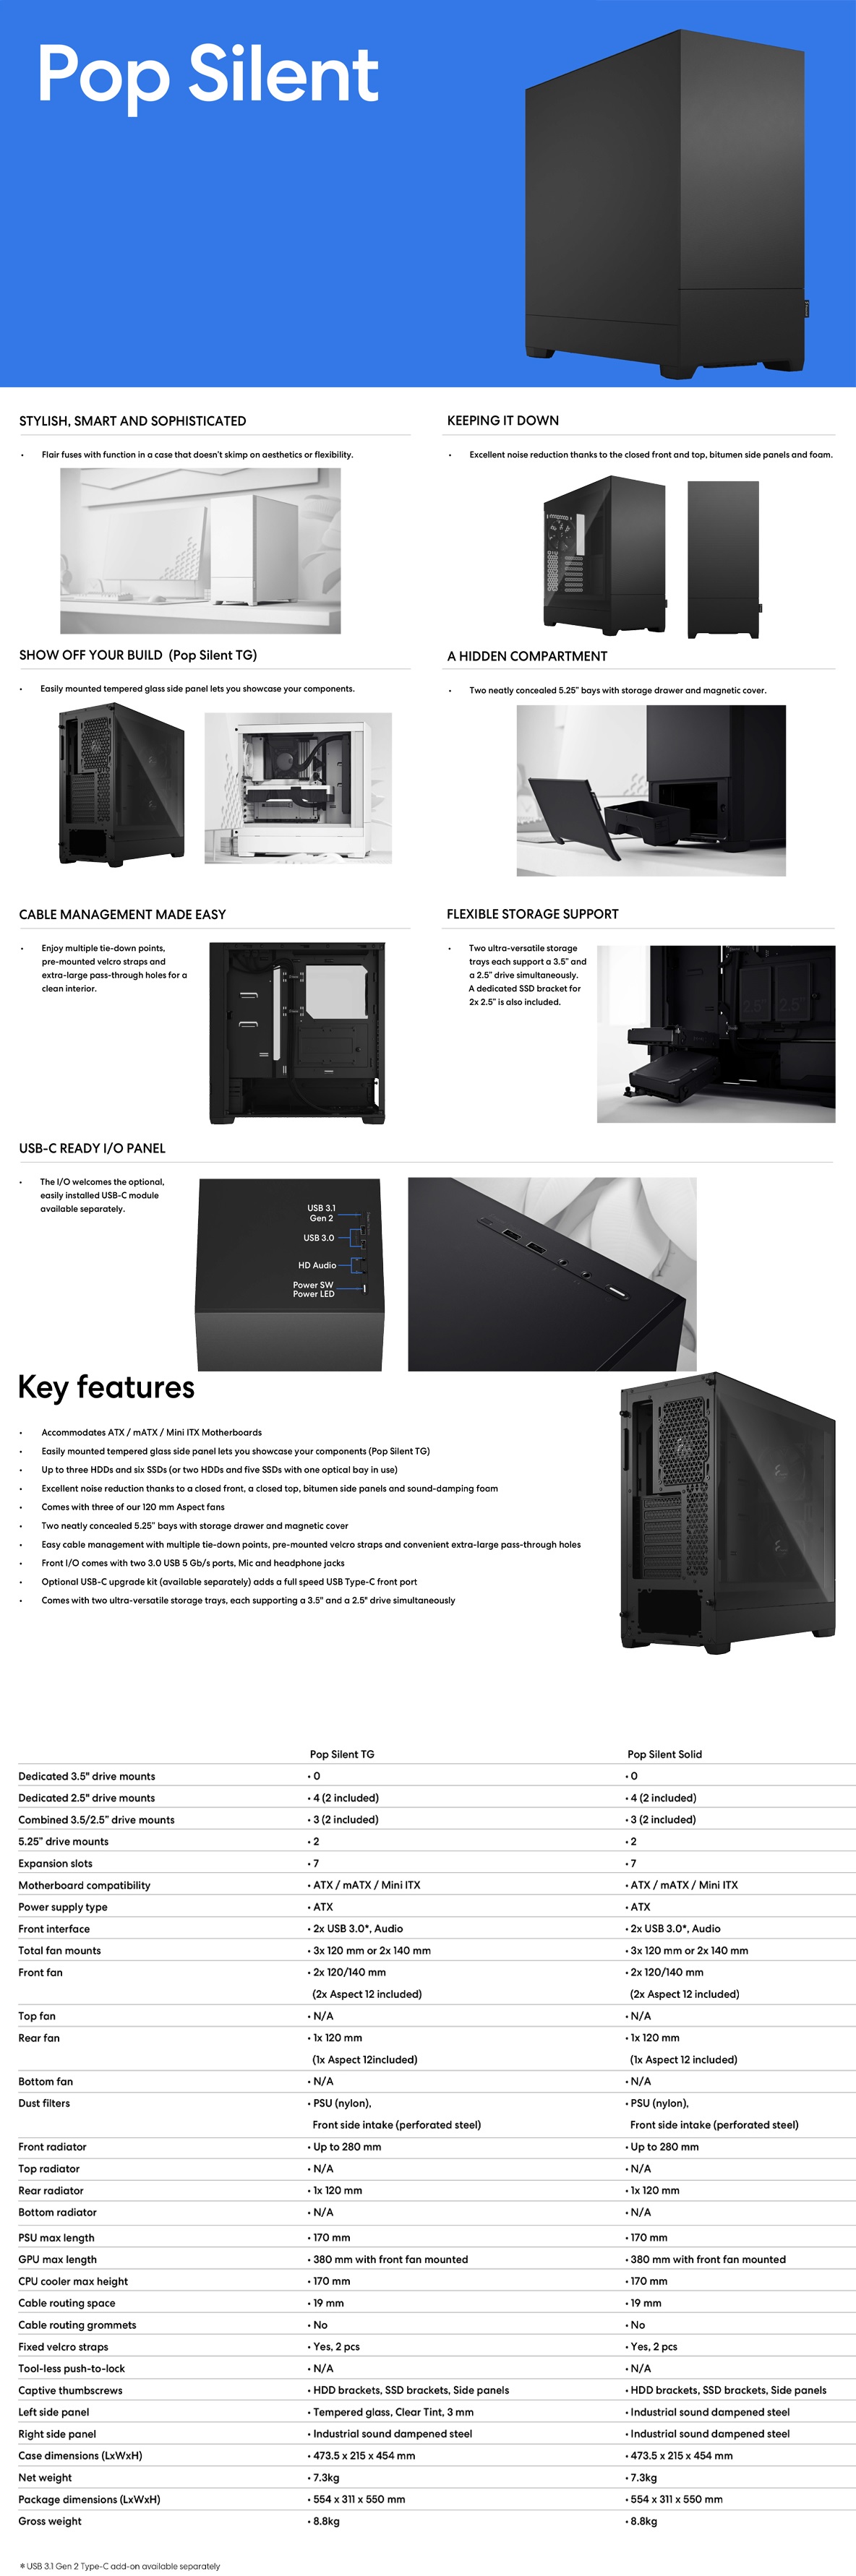 A large marketing image providing additional information about the product Fractal Design Pop Silent TG Clear Tint Mid Tower Case - Black - Additional alt info not provided